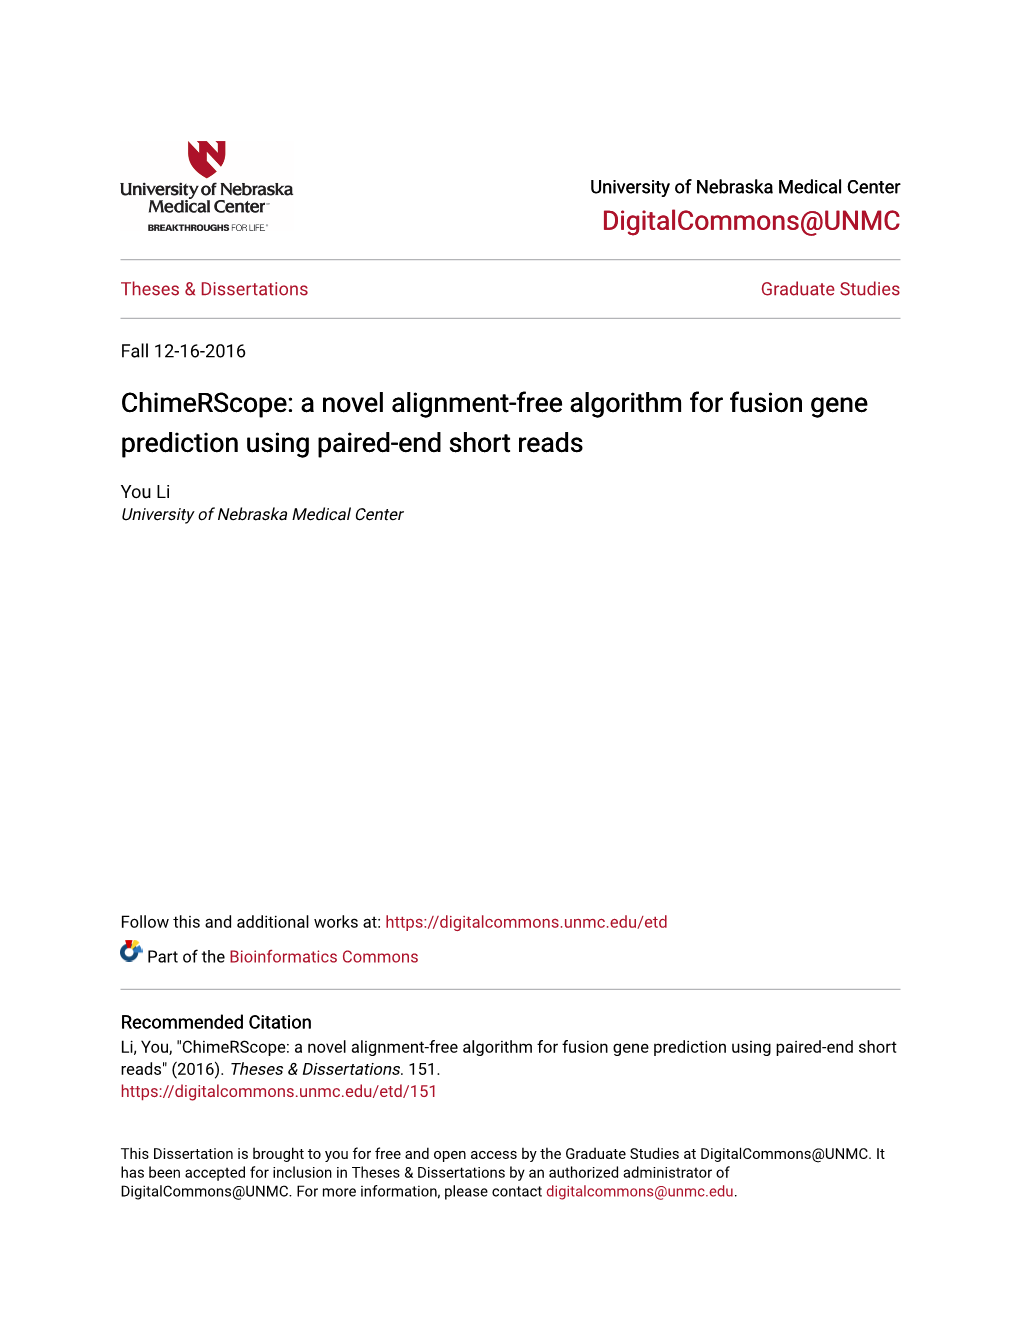 A Novel Alignment-Free Algorithm for Fusion Gene Prediction Using Paired-End Short Reads